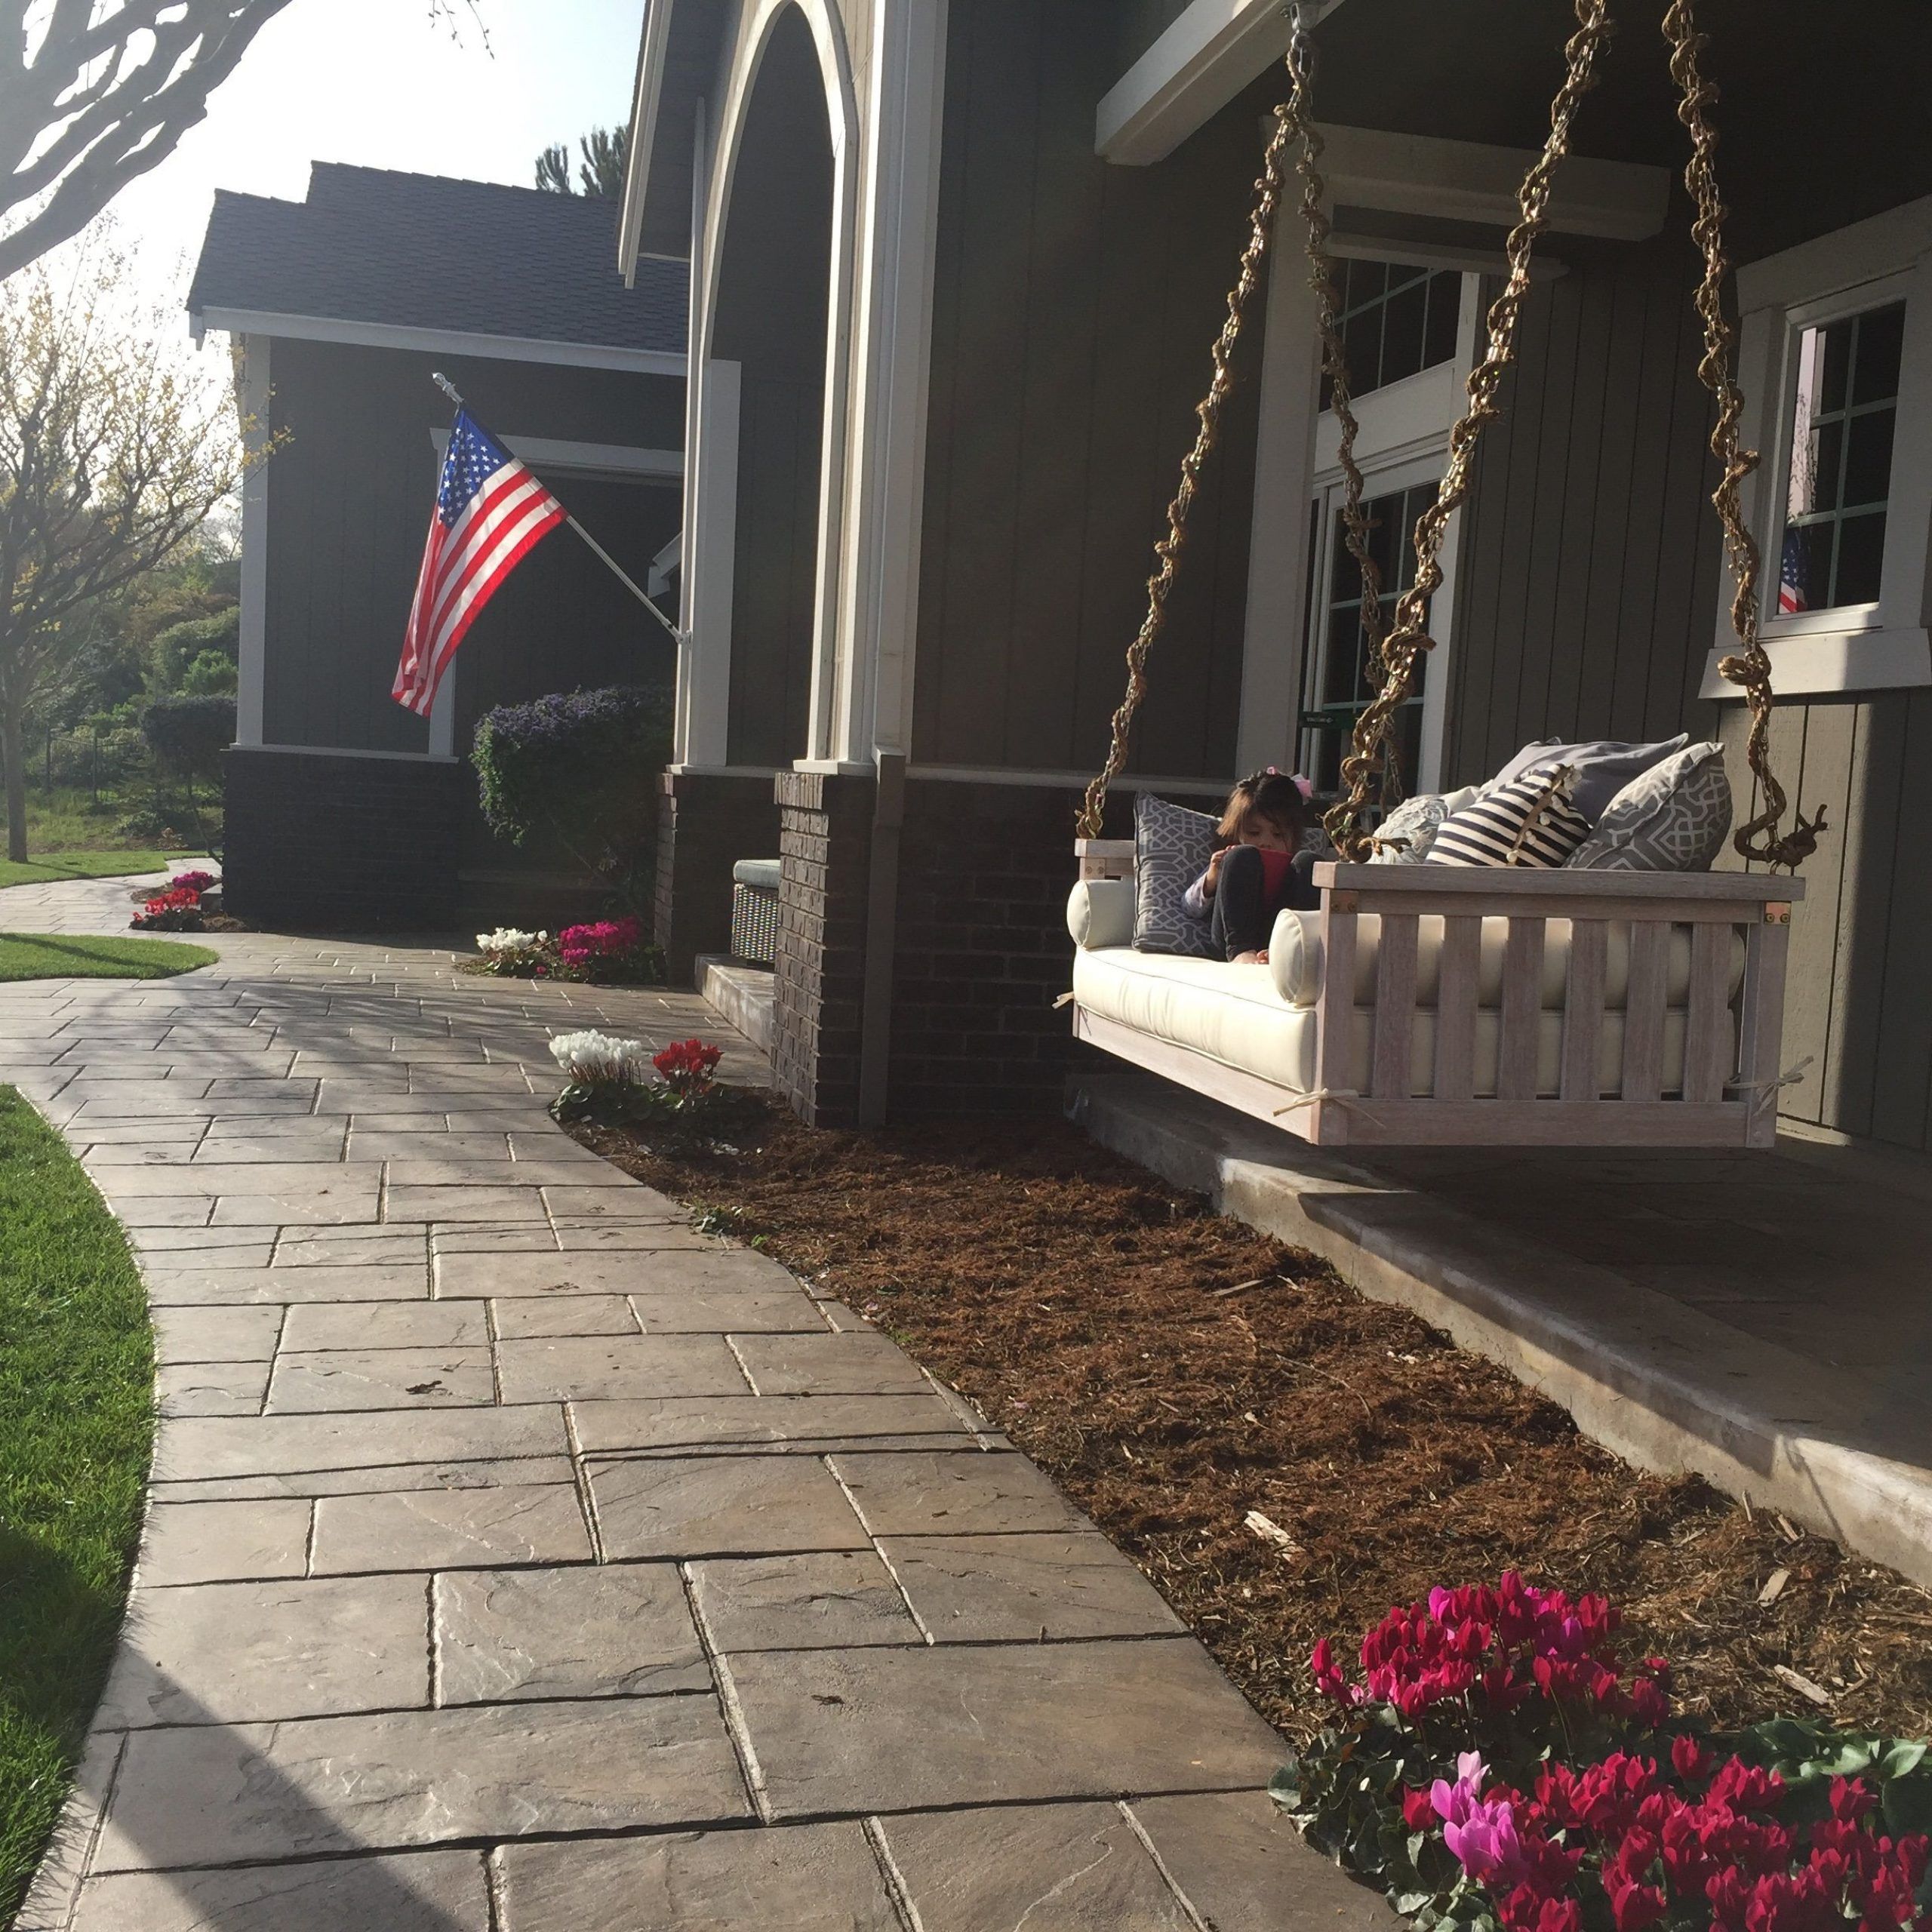 Front Yard, Porch Swing, American Flag, Stamped Concrete Intended For Famous American Flag Porch Swings (View 10 of 25)